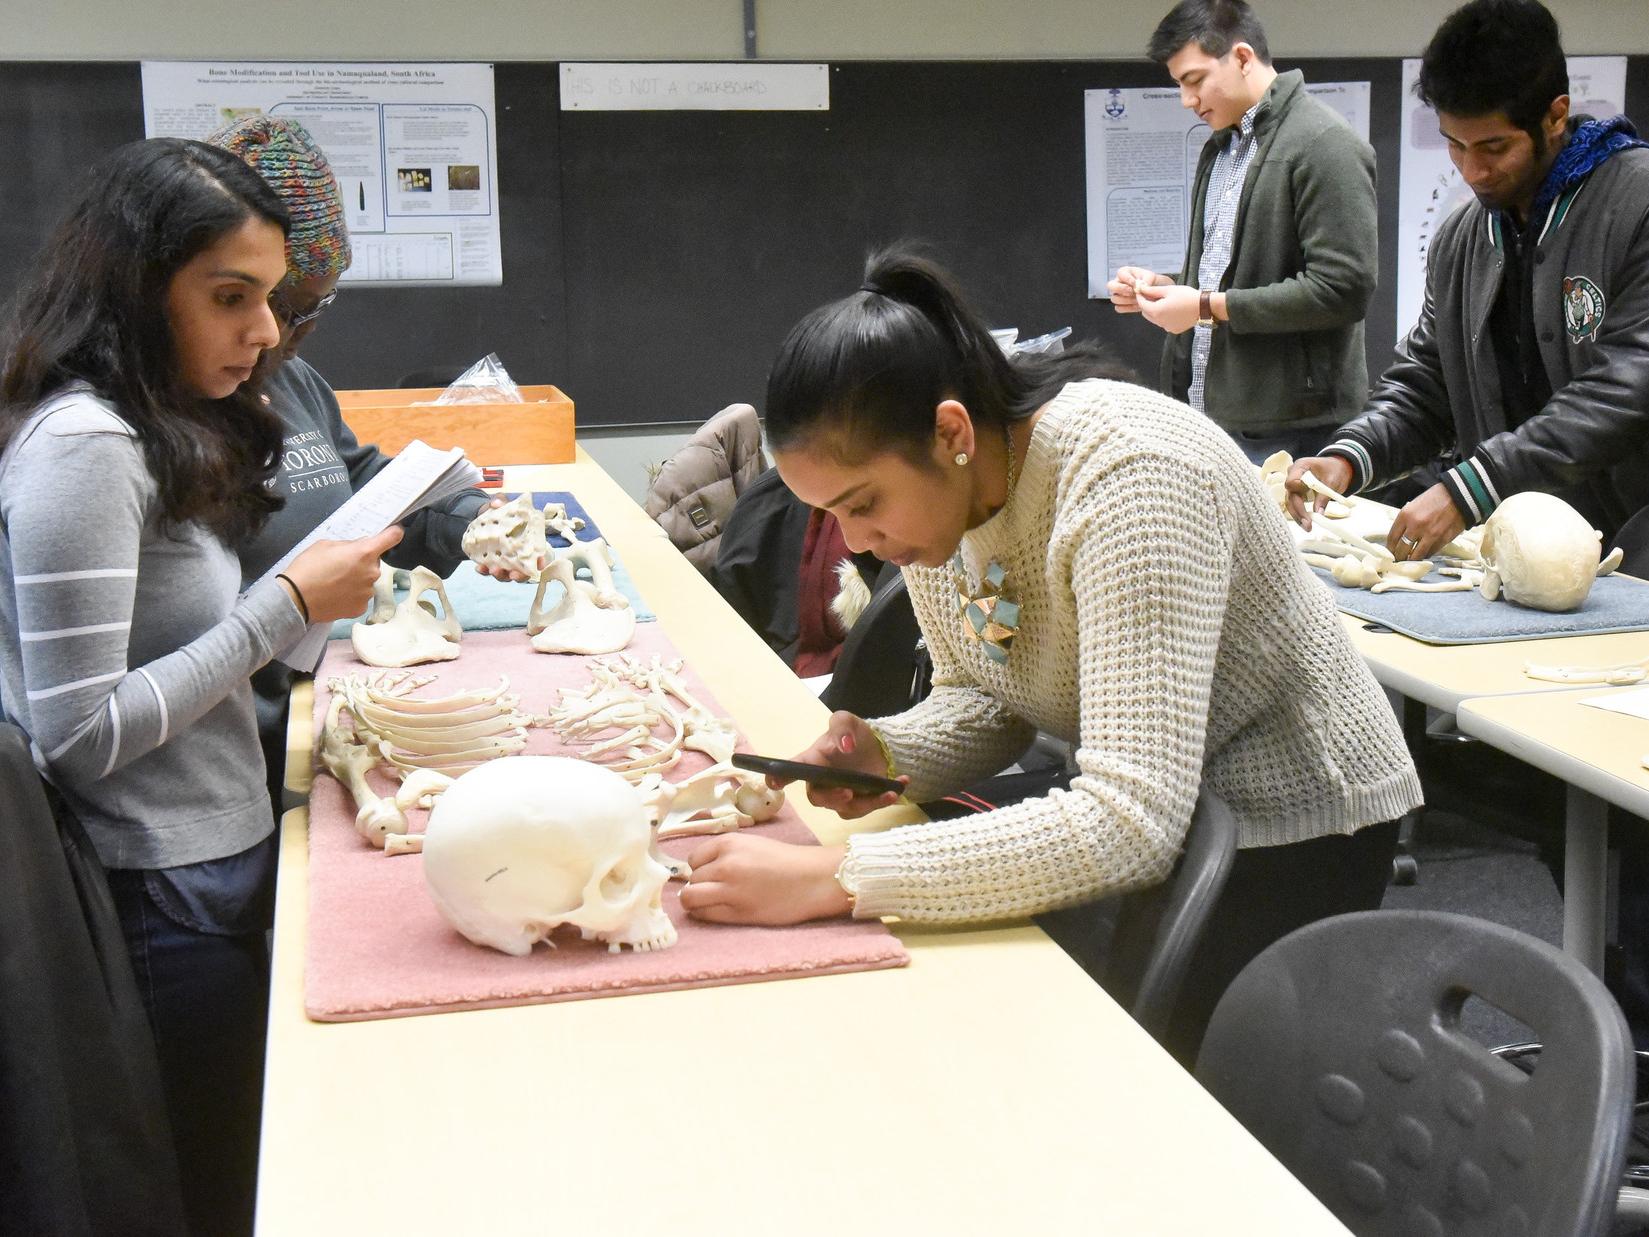 Students in an anthropology lab examining skeletons